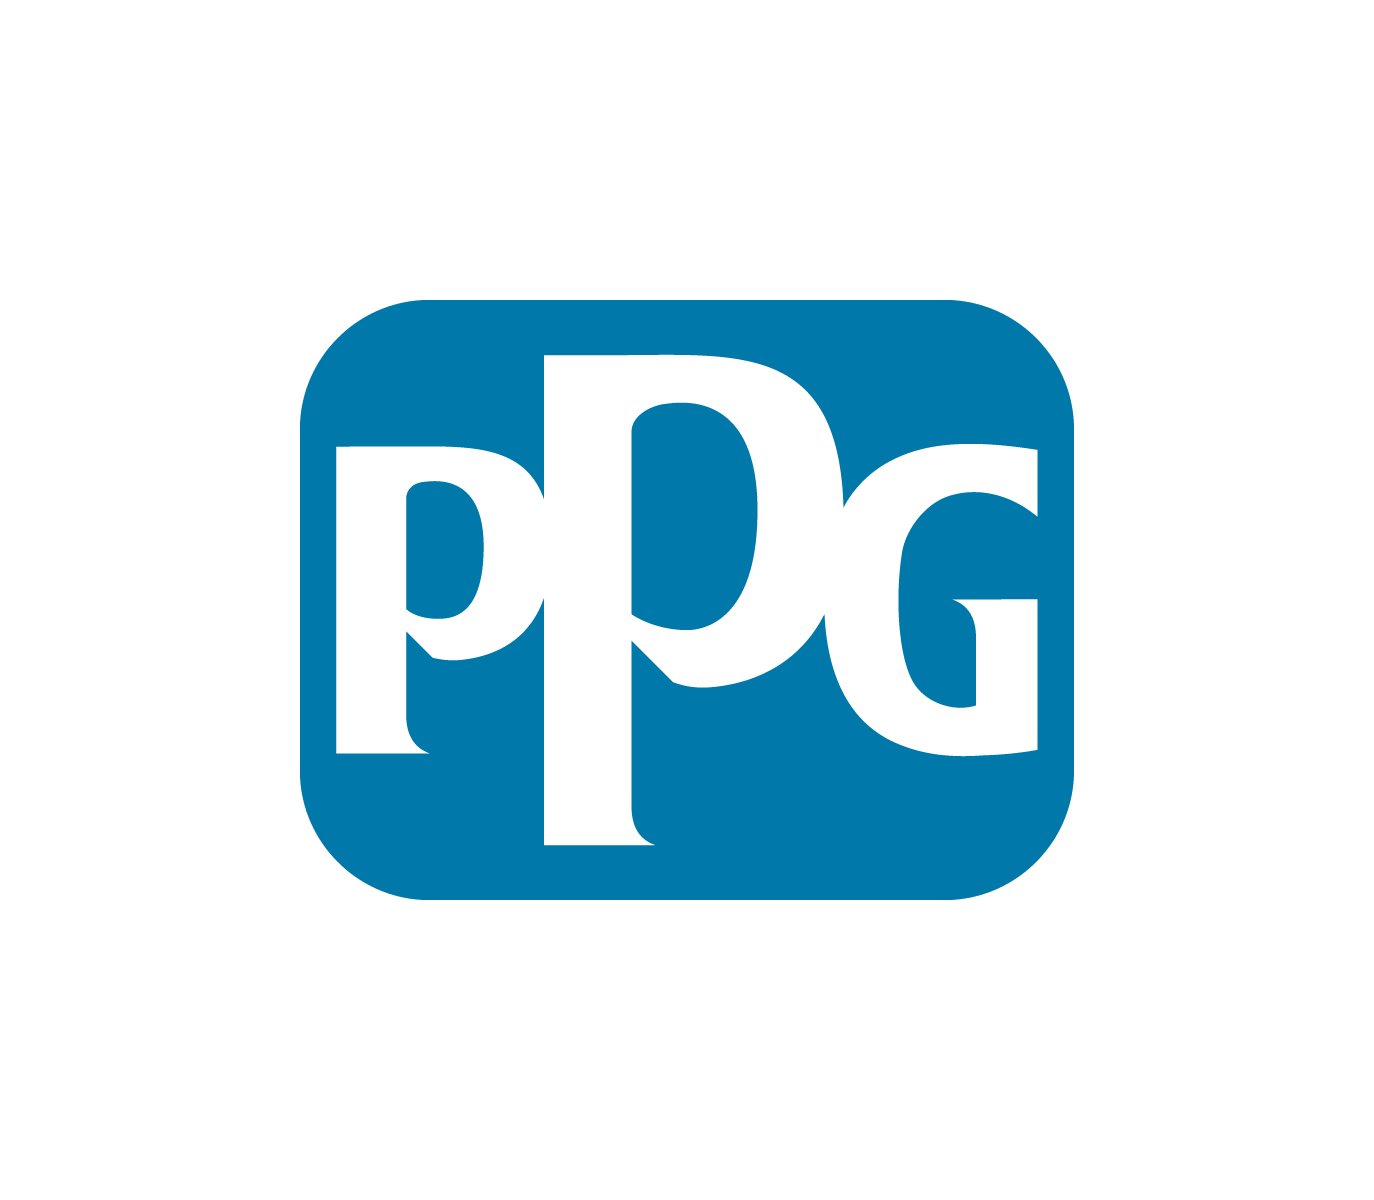 Powered by: PPG